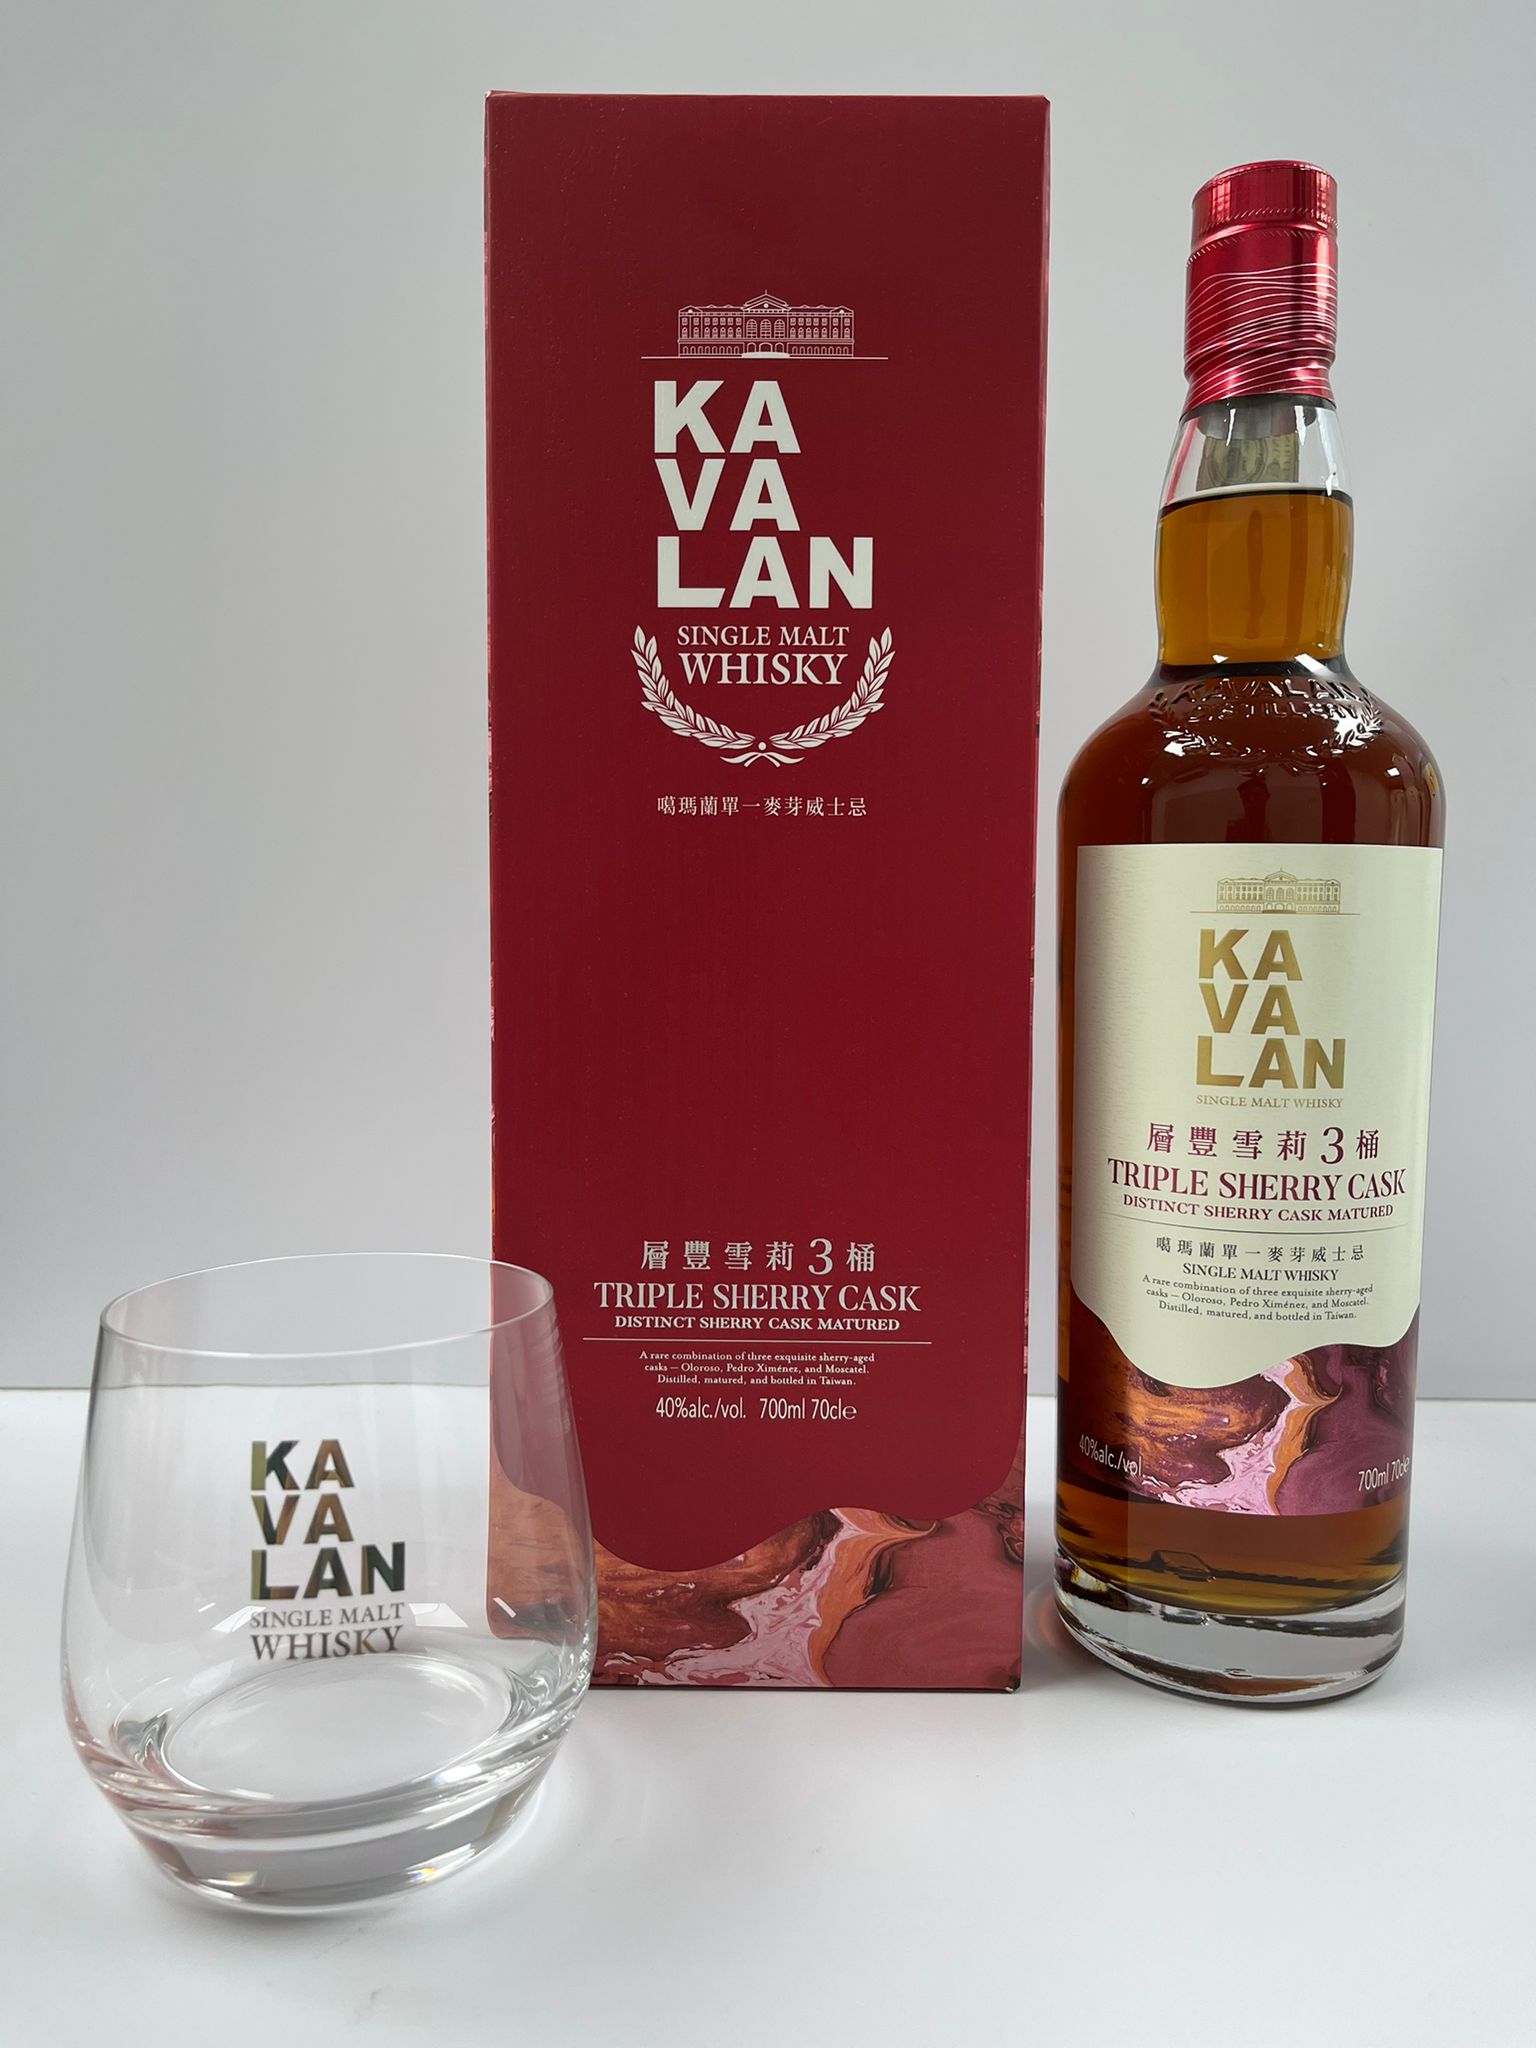 Best Buy - Kavalan Triple Sherry Cask 70cl 40% With 1 FREE Kavalan Whisky Glass